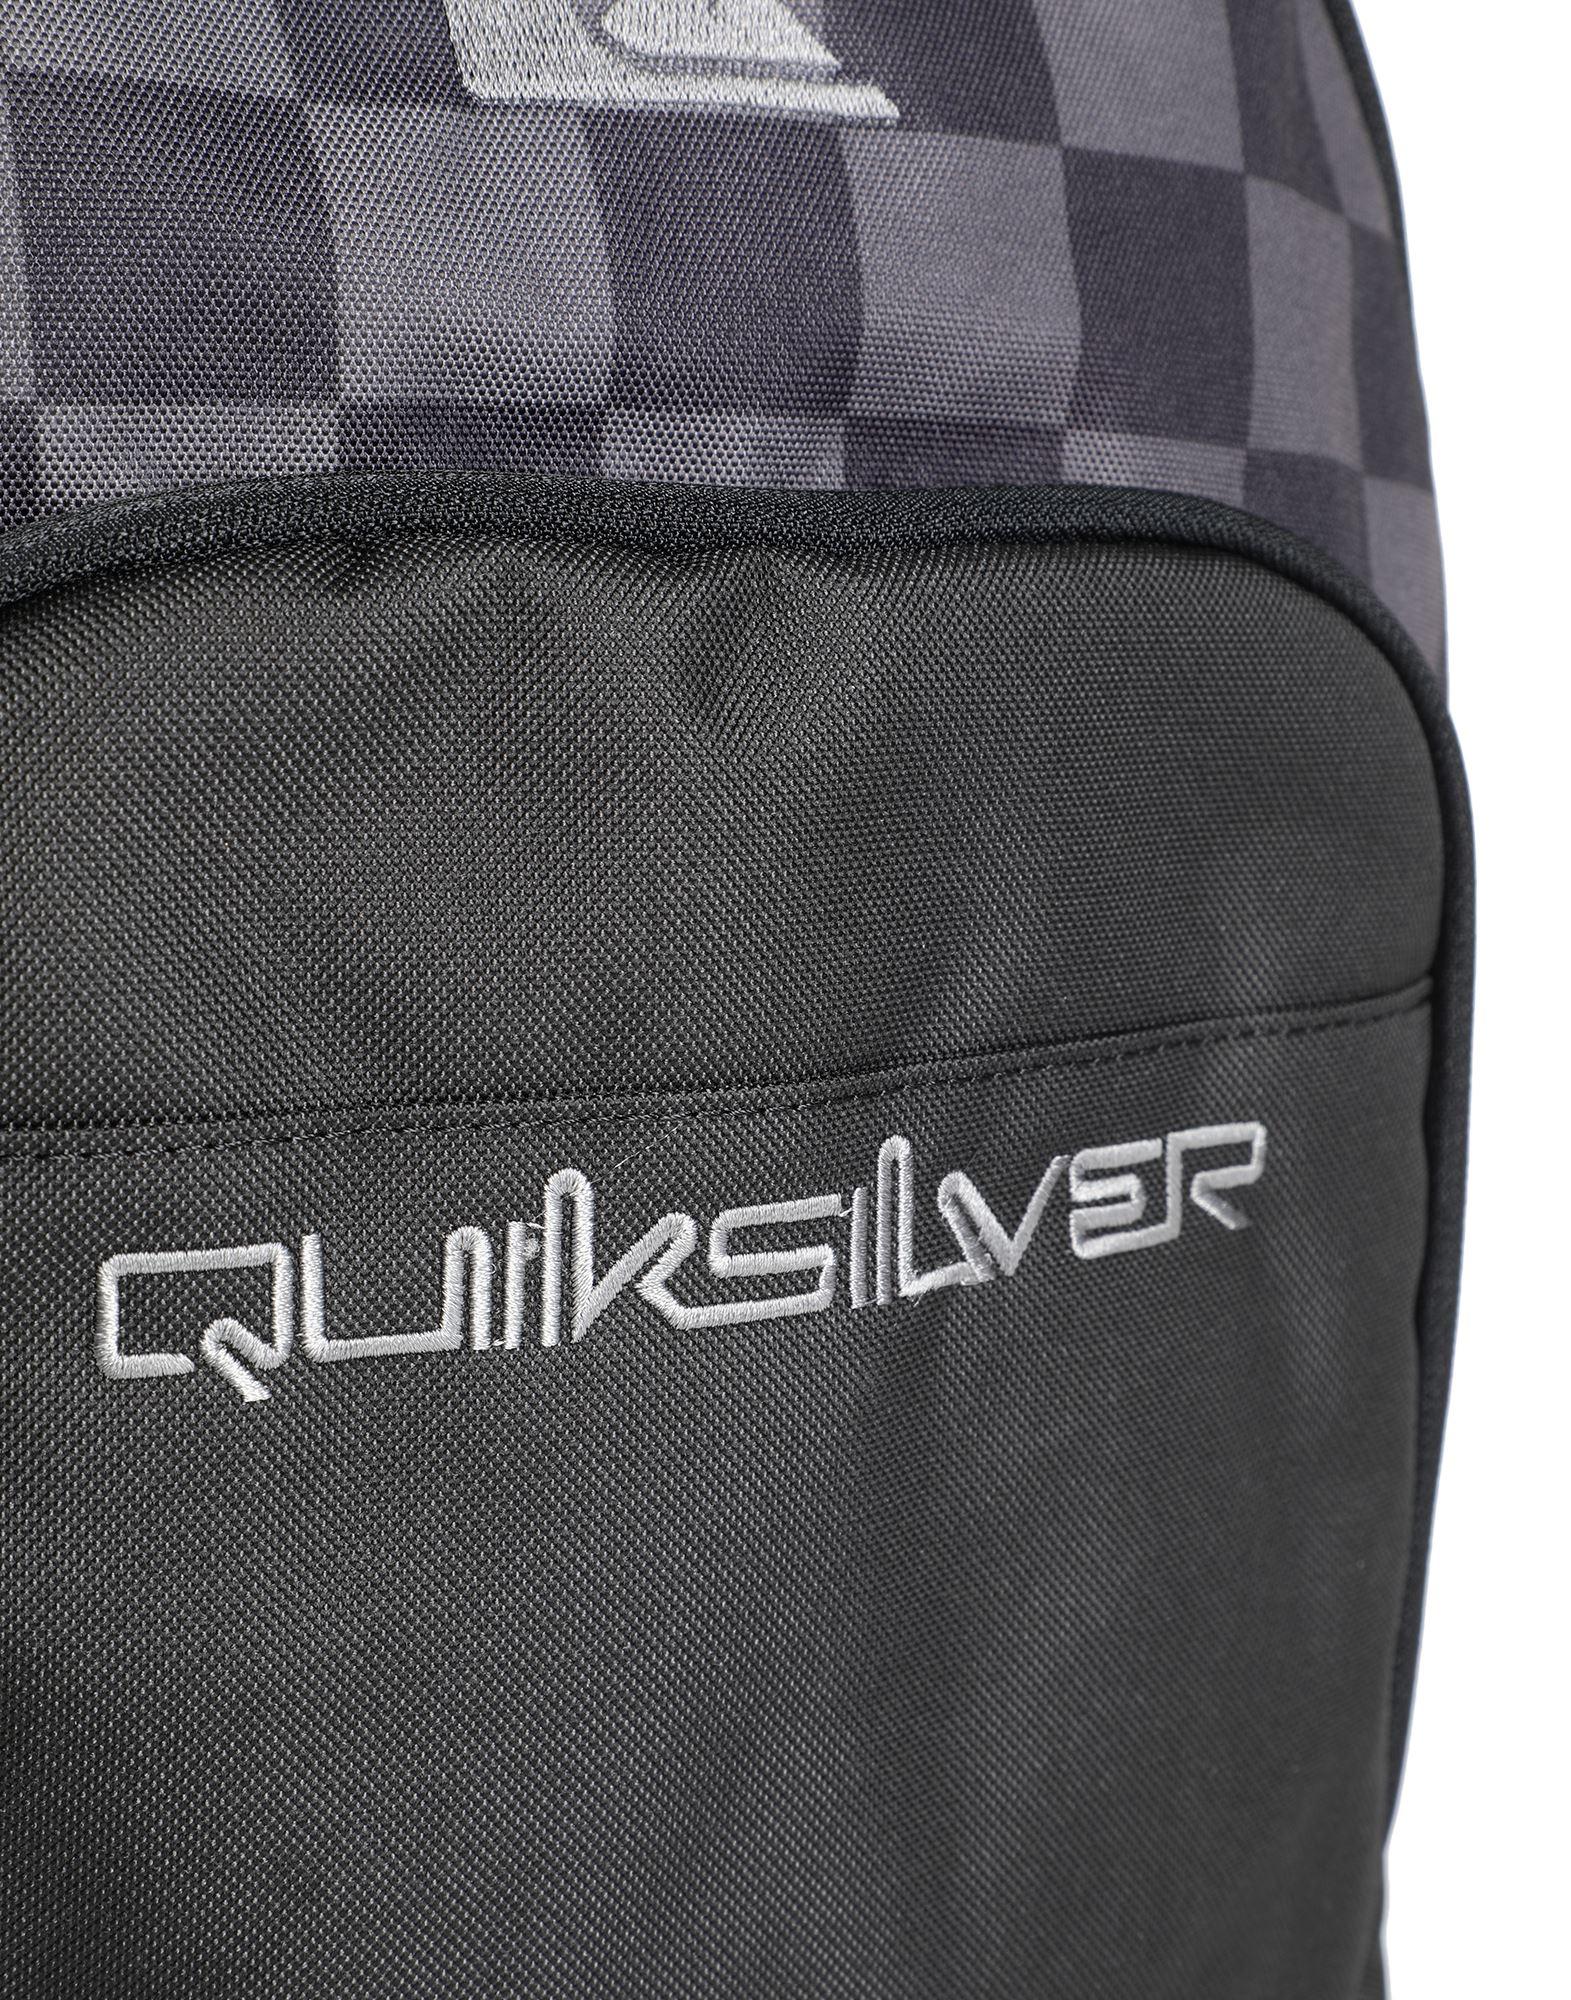 KPWH QuickSilver Backpack New School,Color Black/Grey/Yellow Style 4153040302 